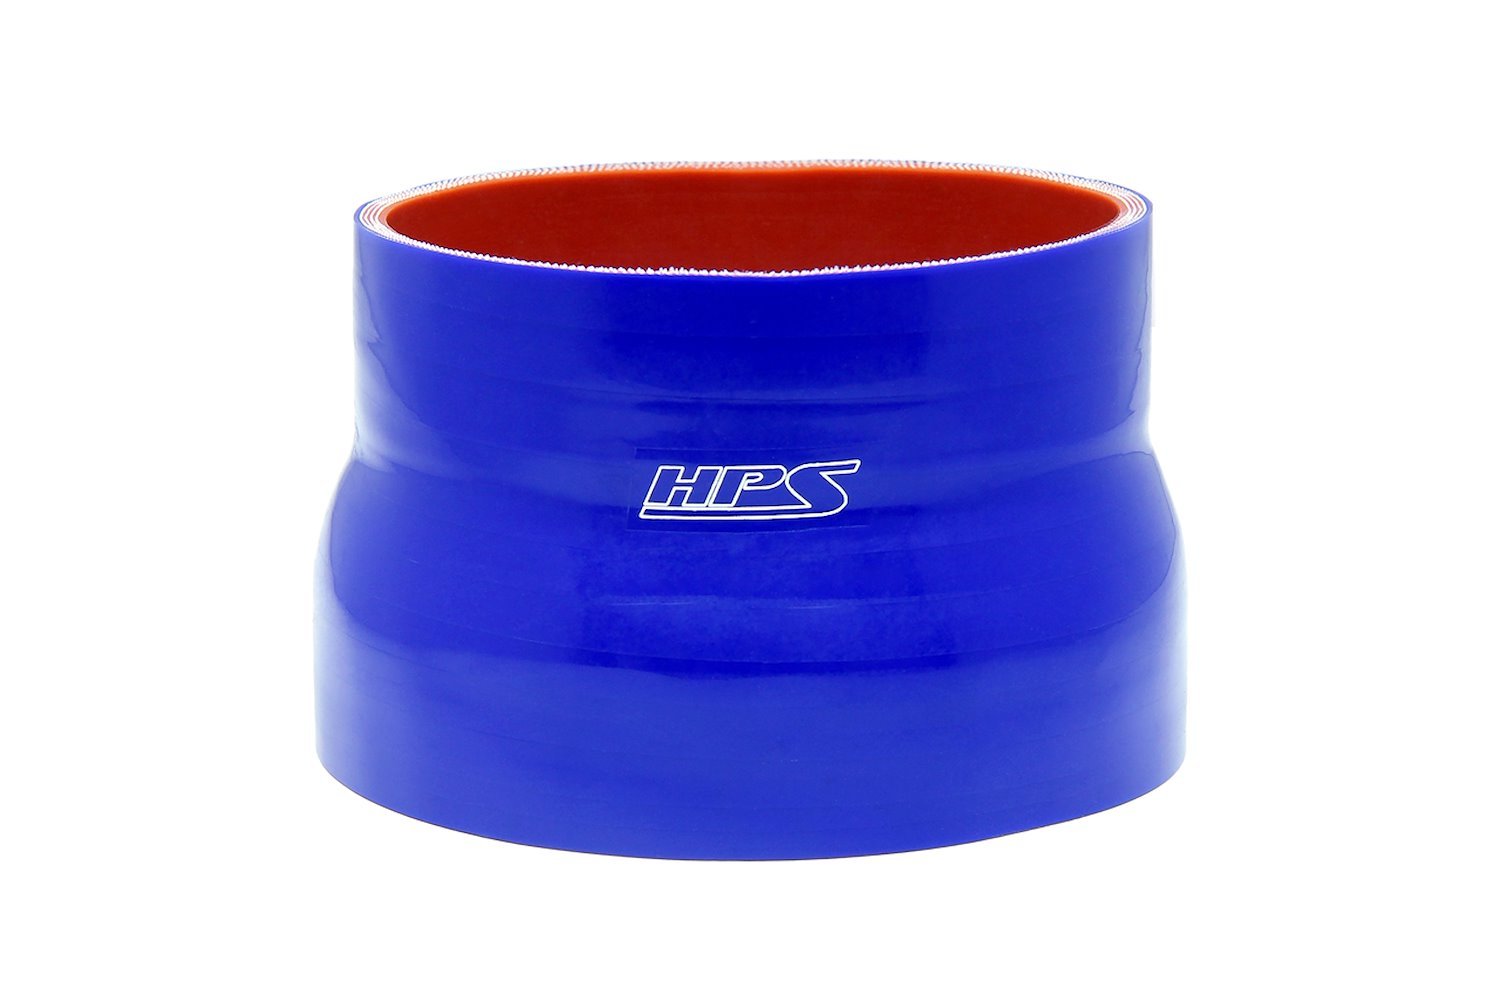 HTSR-350-500-L4-BLUE Silicone Reducer Hose, High-Temp 4-Ply Reinforced, 3-1/2 in. - 5 in. ID, 4 in. Long, Blue